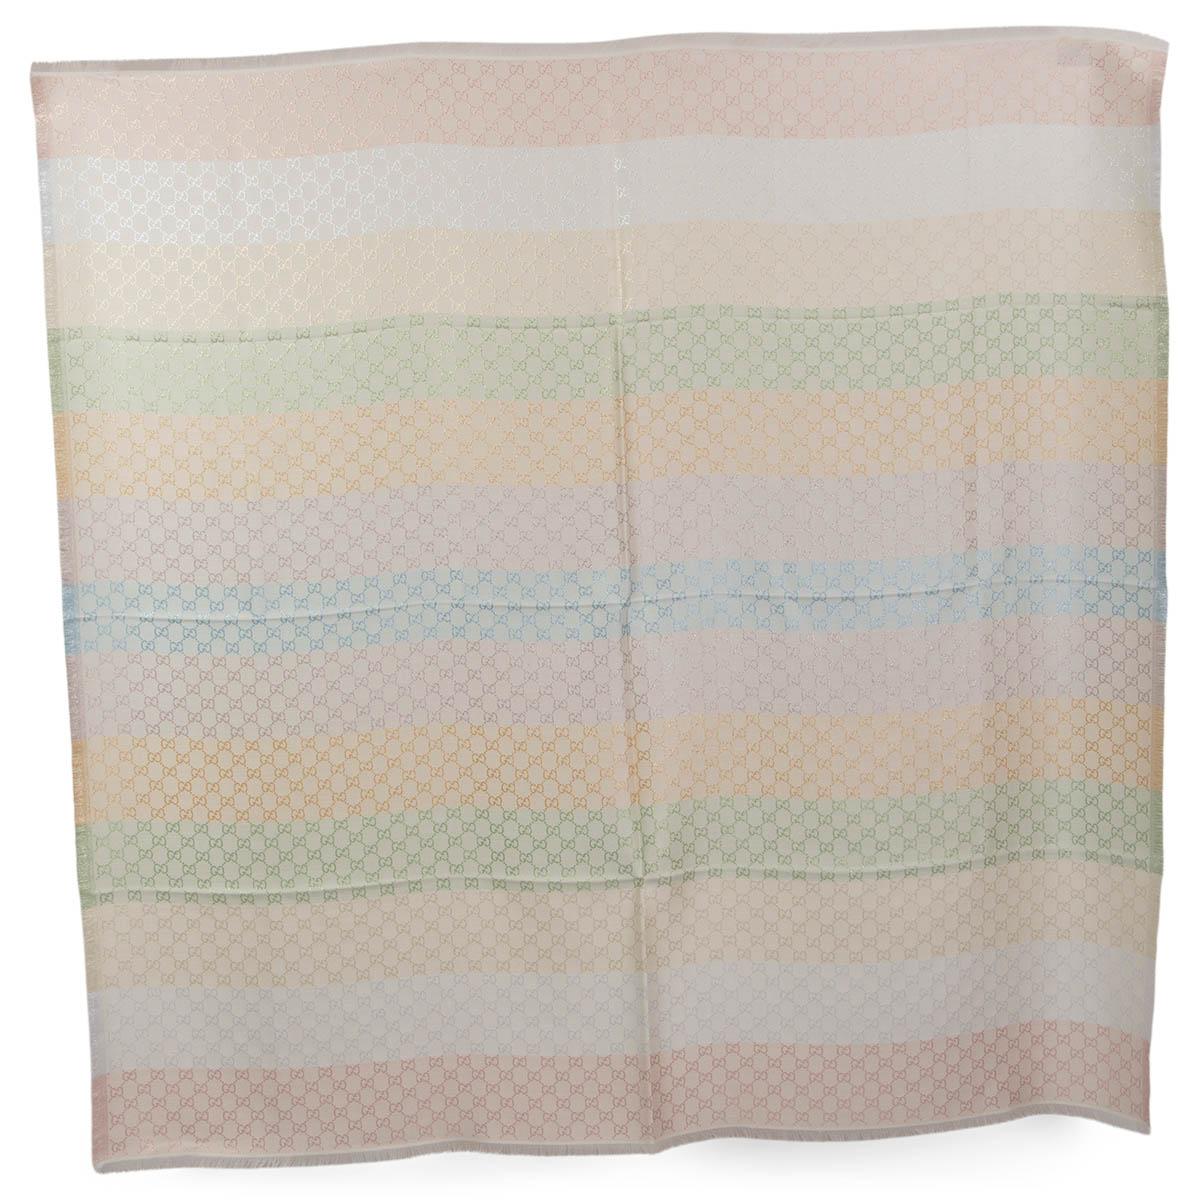 100% authentic Gucci GG Monogram shawl crafted using a jacquard technique and featuring the GG pattern in pastel rainbow, light blue, light pink, yellow, light green, champagne and silver 31% viscose 28% cotton 23% wool 10% silk 8% metallic fiber in